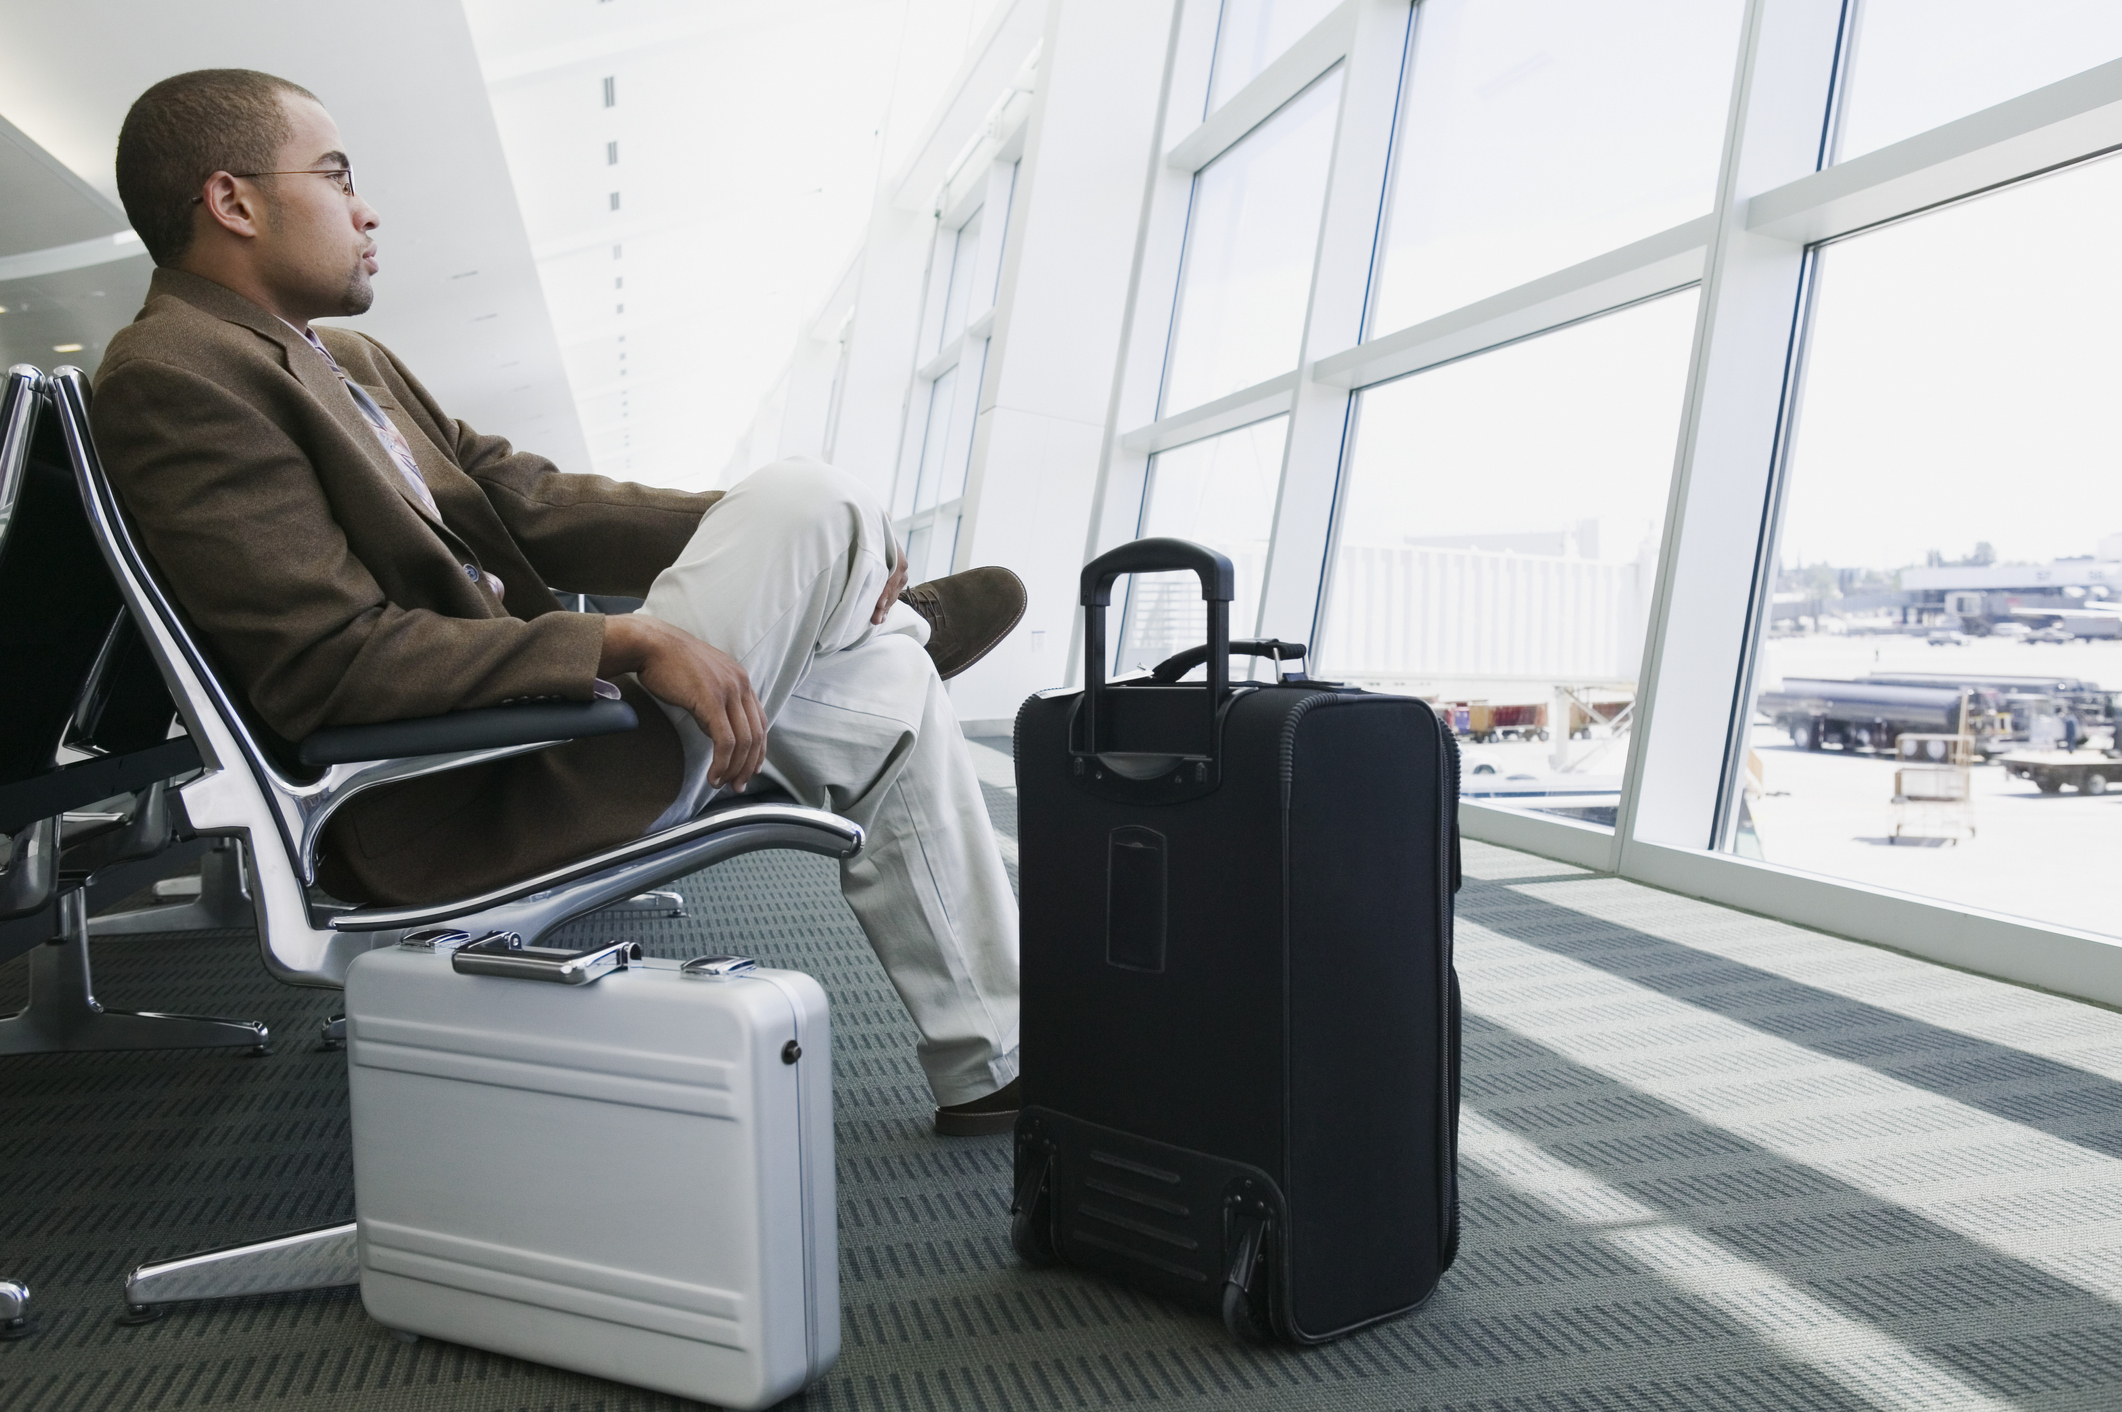 A man sits in an airport with luggage